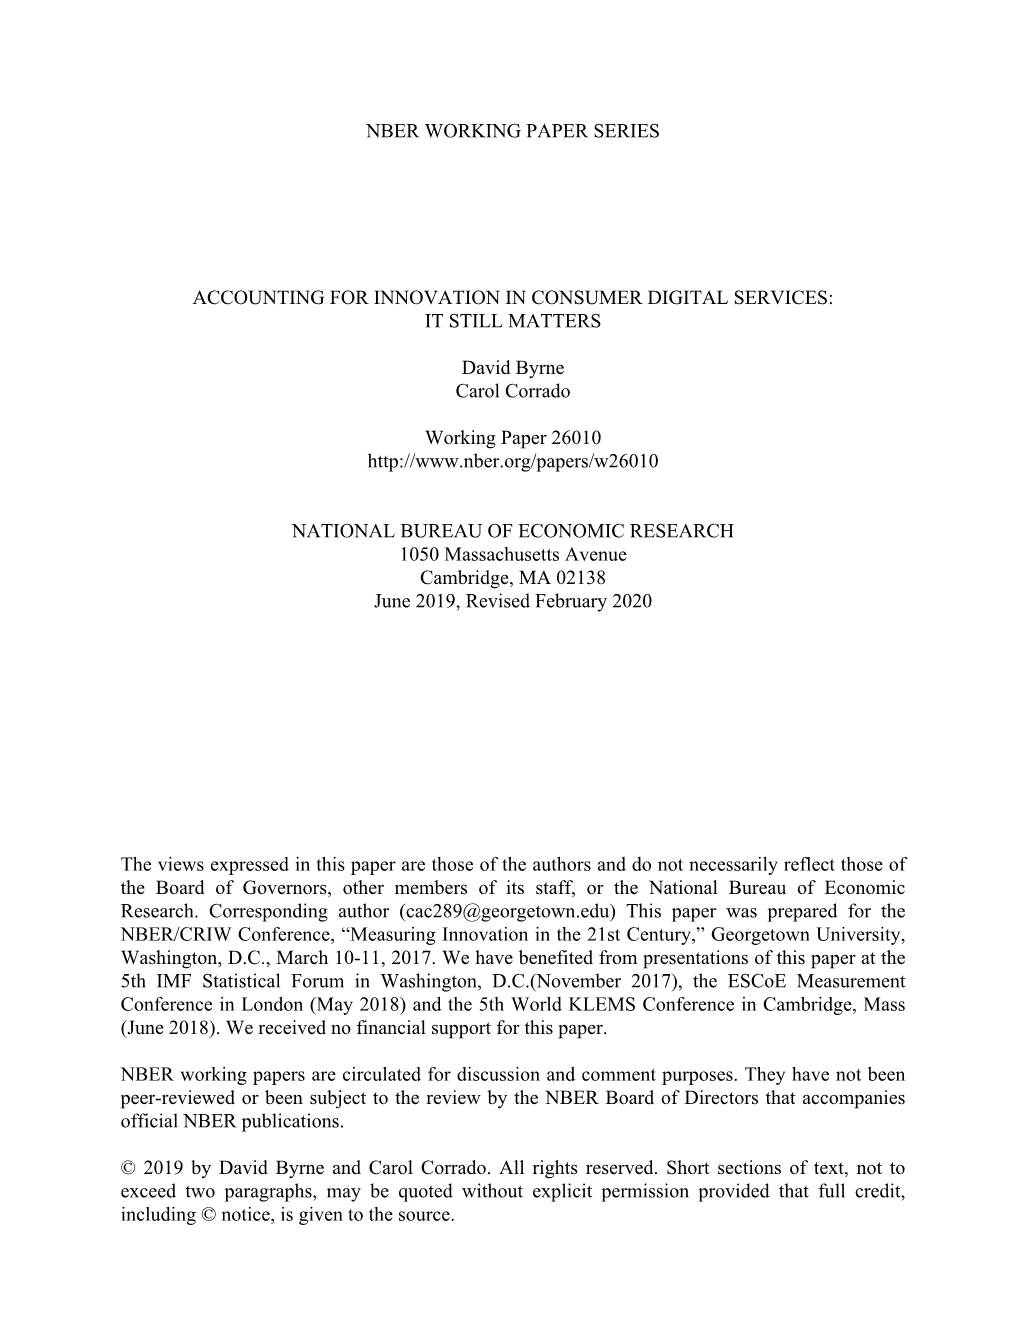 NBER WORKING PAPER SERIES ACCOUNTING for INNOVATION in CONSUMER DIGITAL SERVICES: IT STILL MATTERS David Byrne Carol Corrado